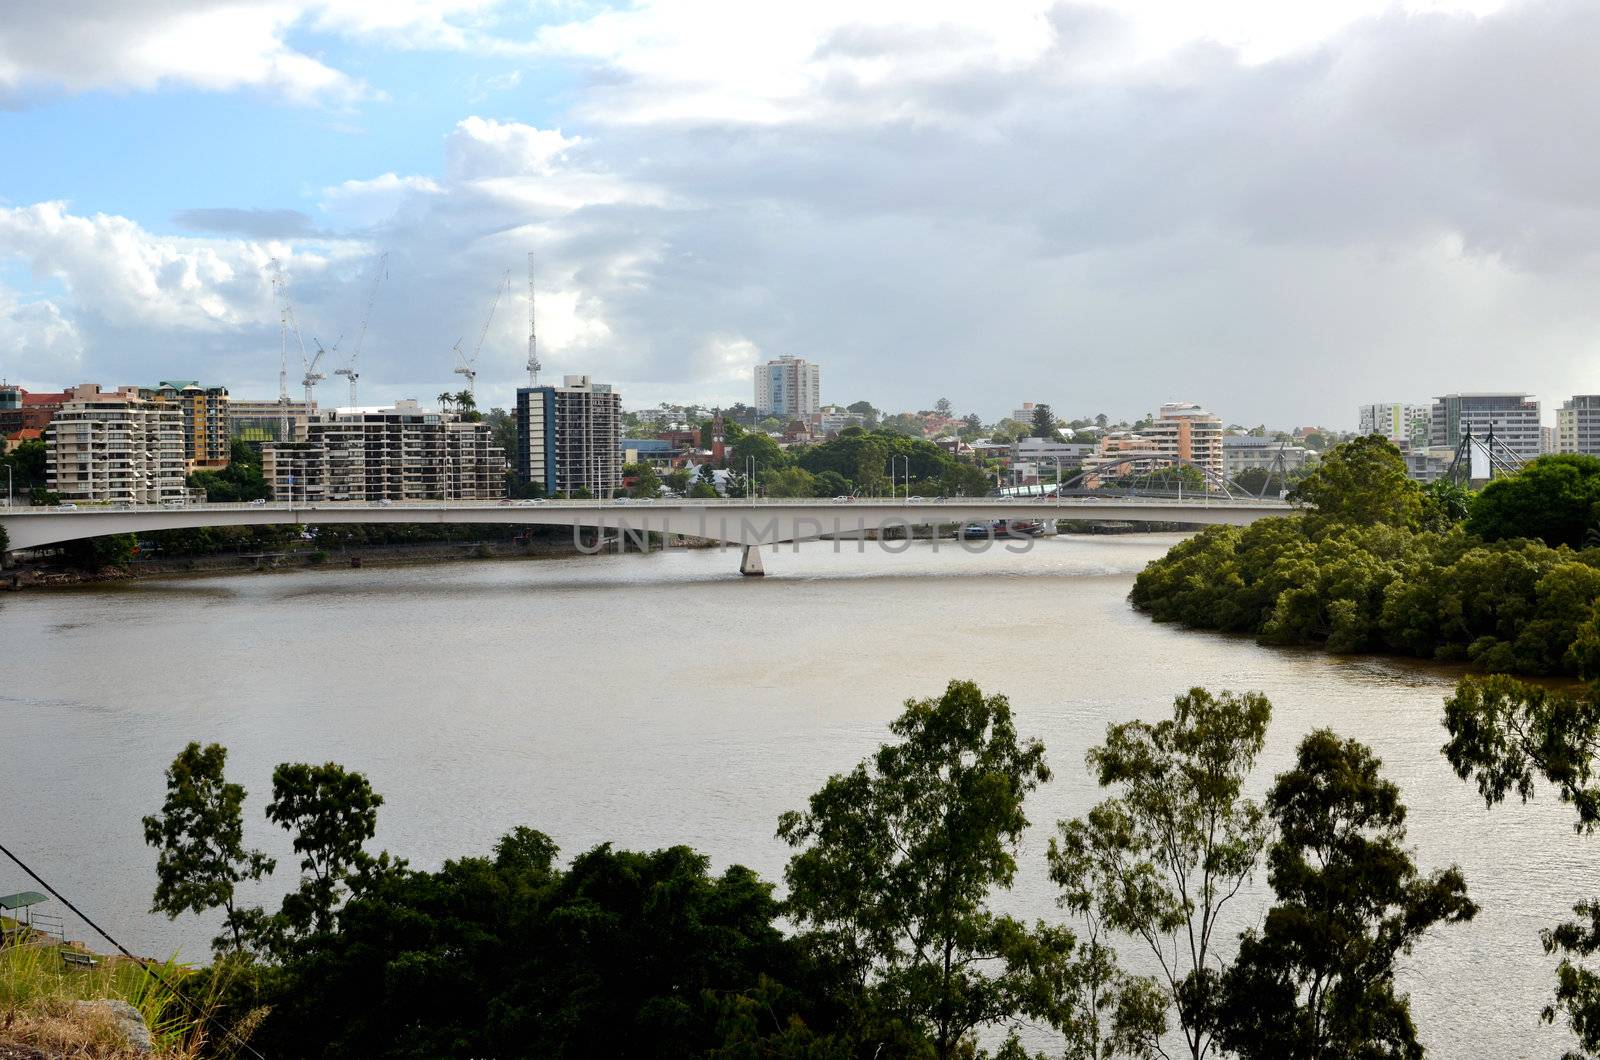 Captain Cook Bridge linking Brisbane's south side with the central business area of the city.